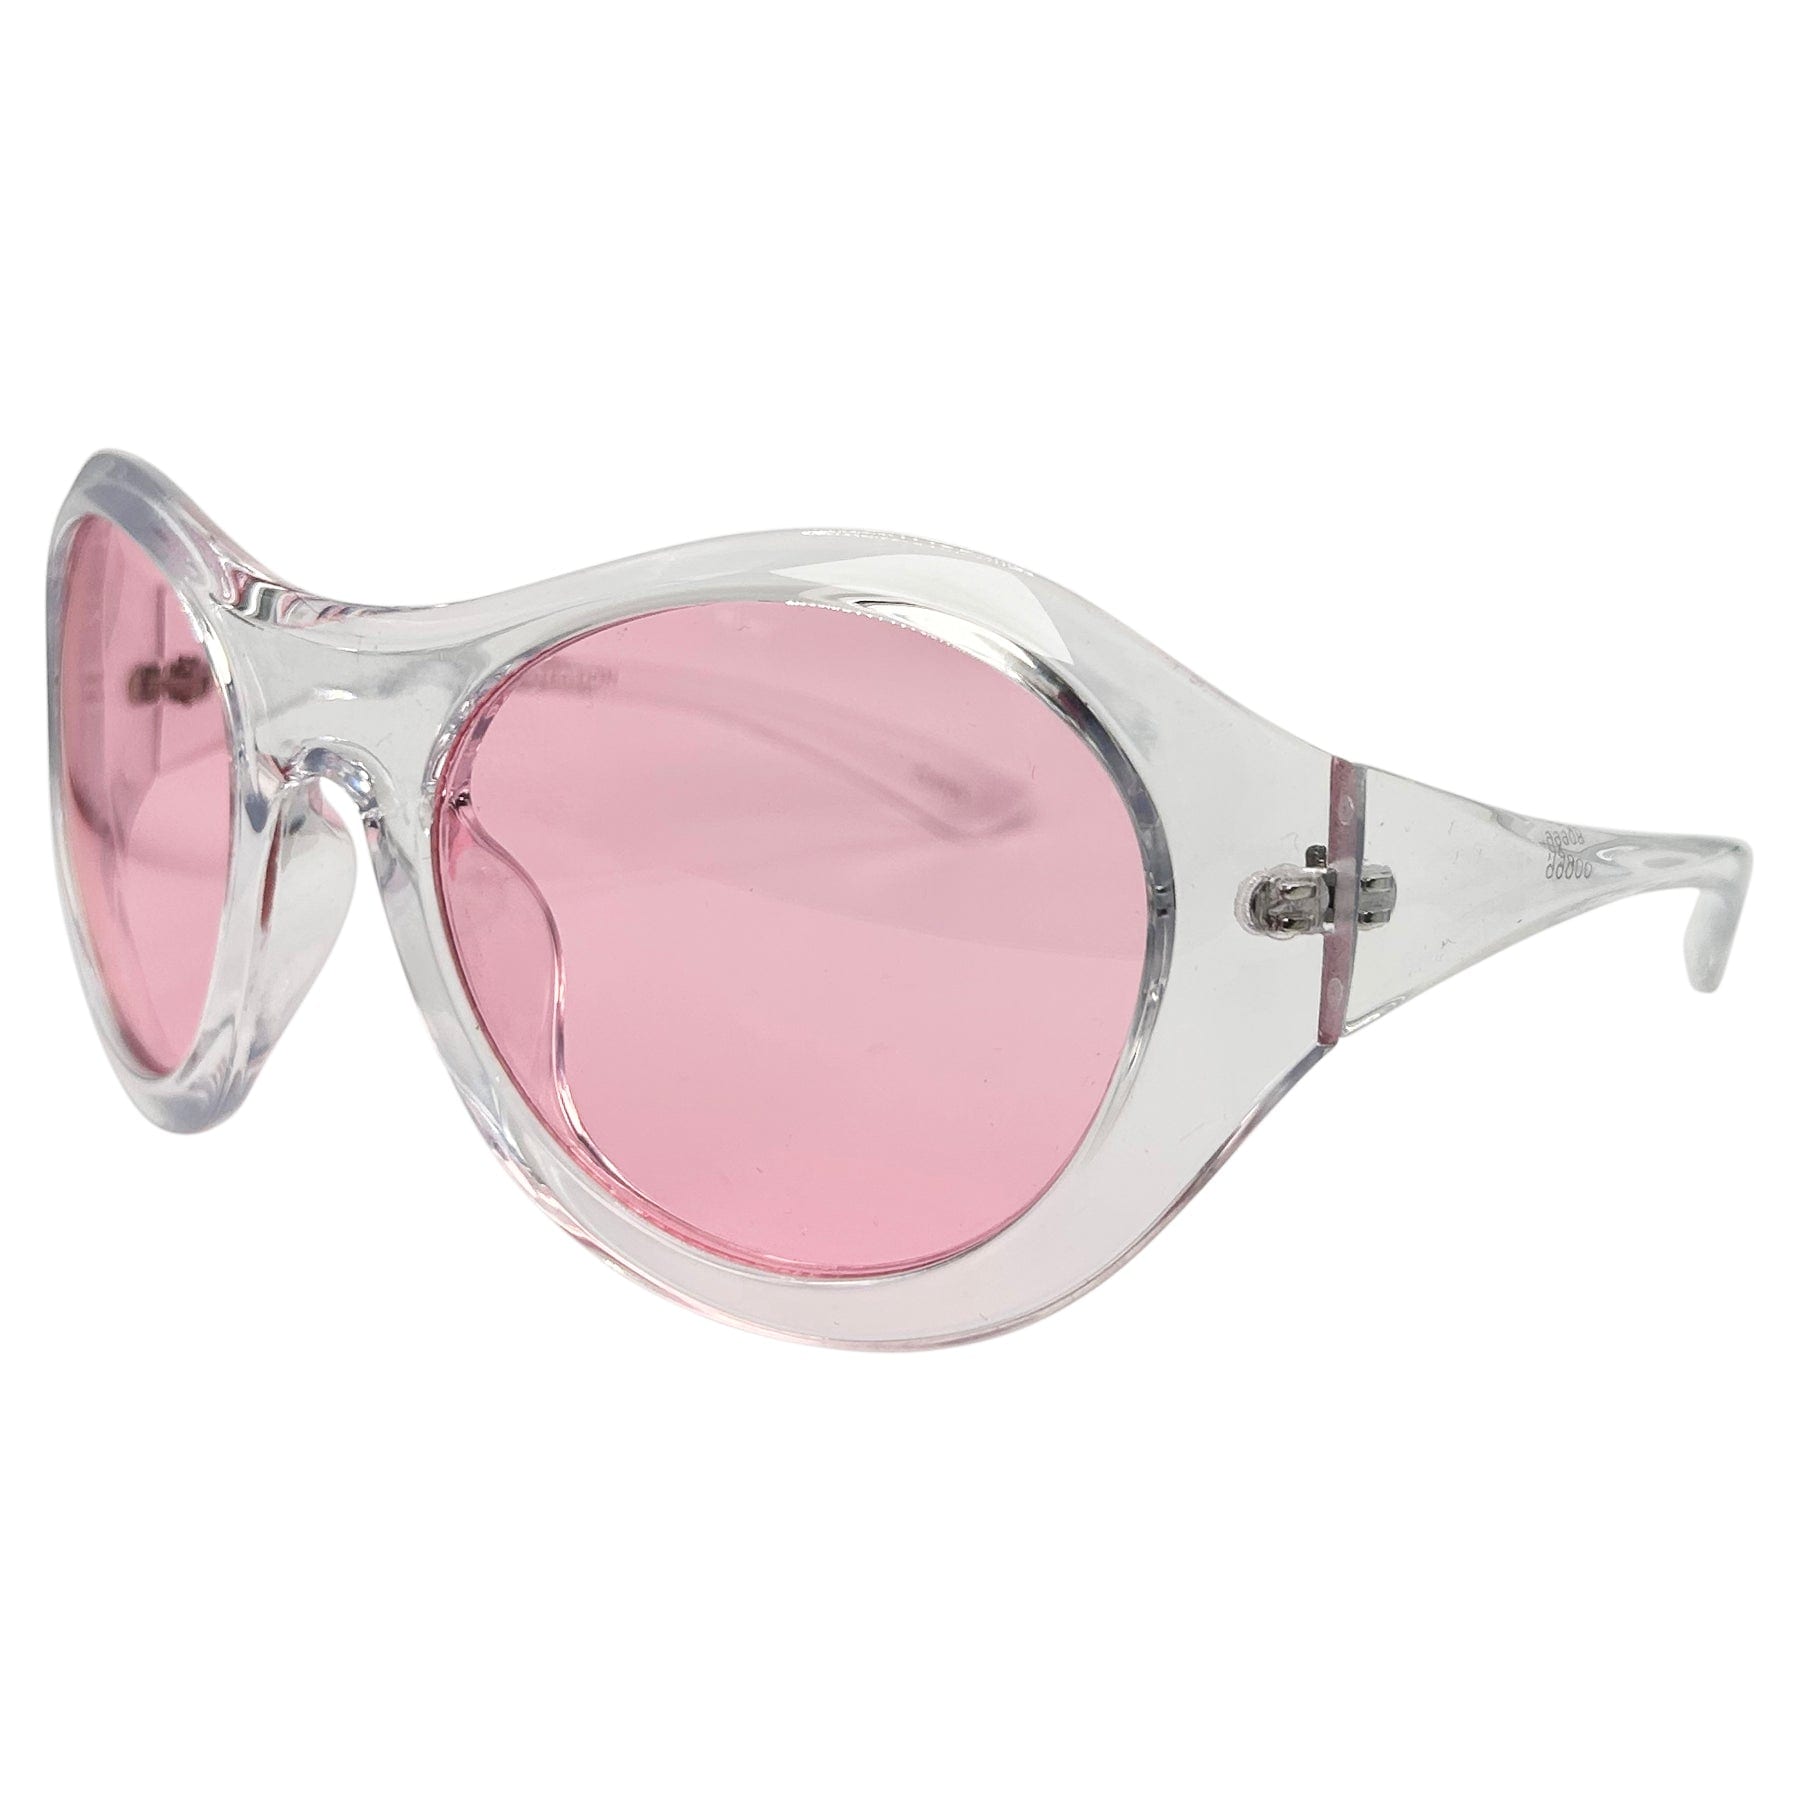 unique aviator oversized sunglasses with a boho chic style and pink lens